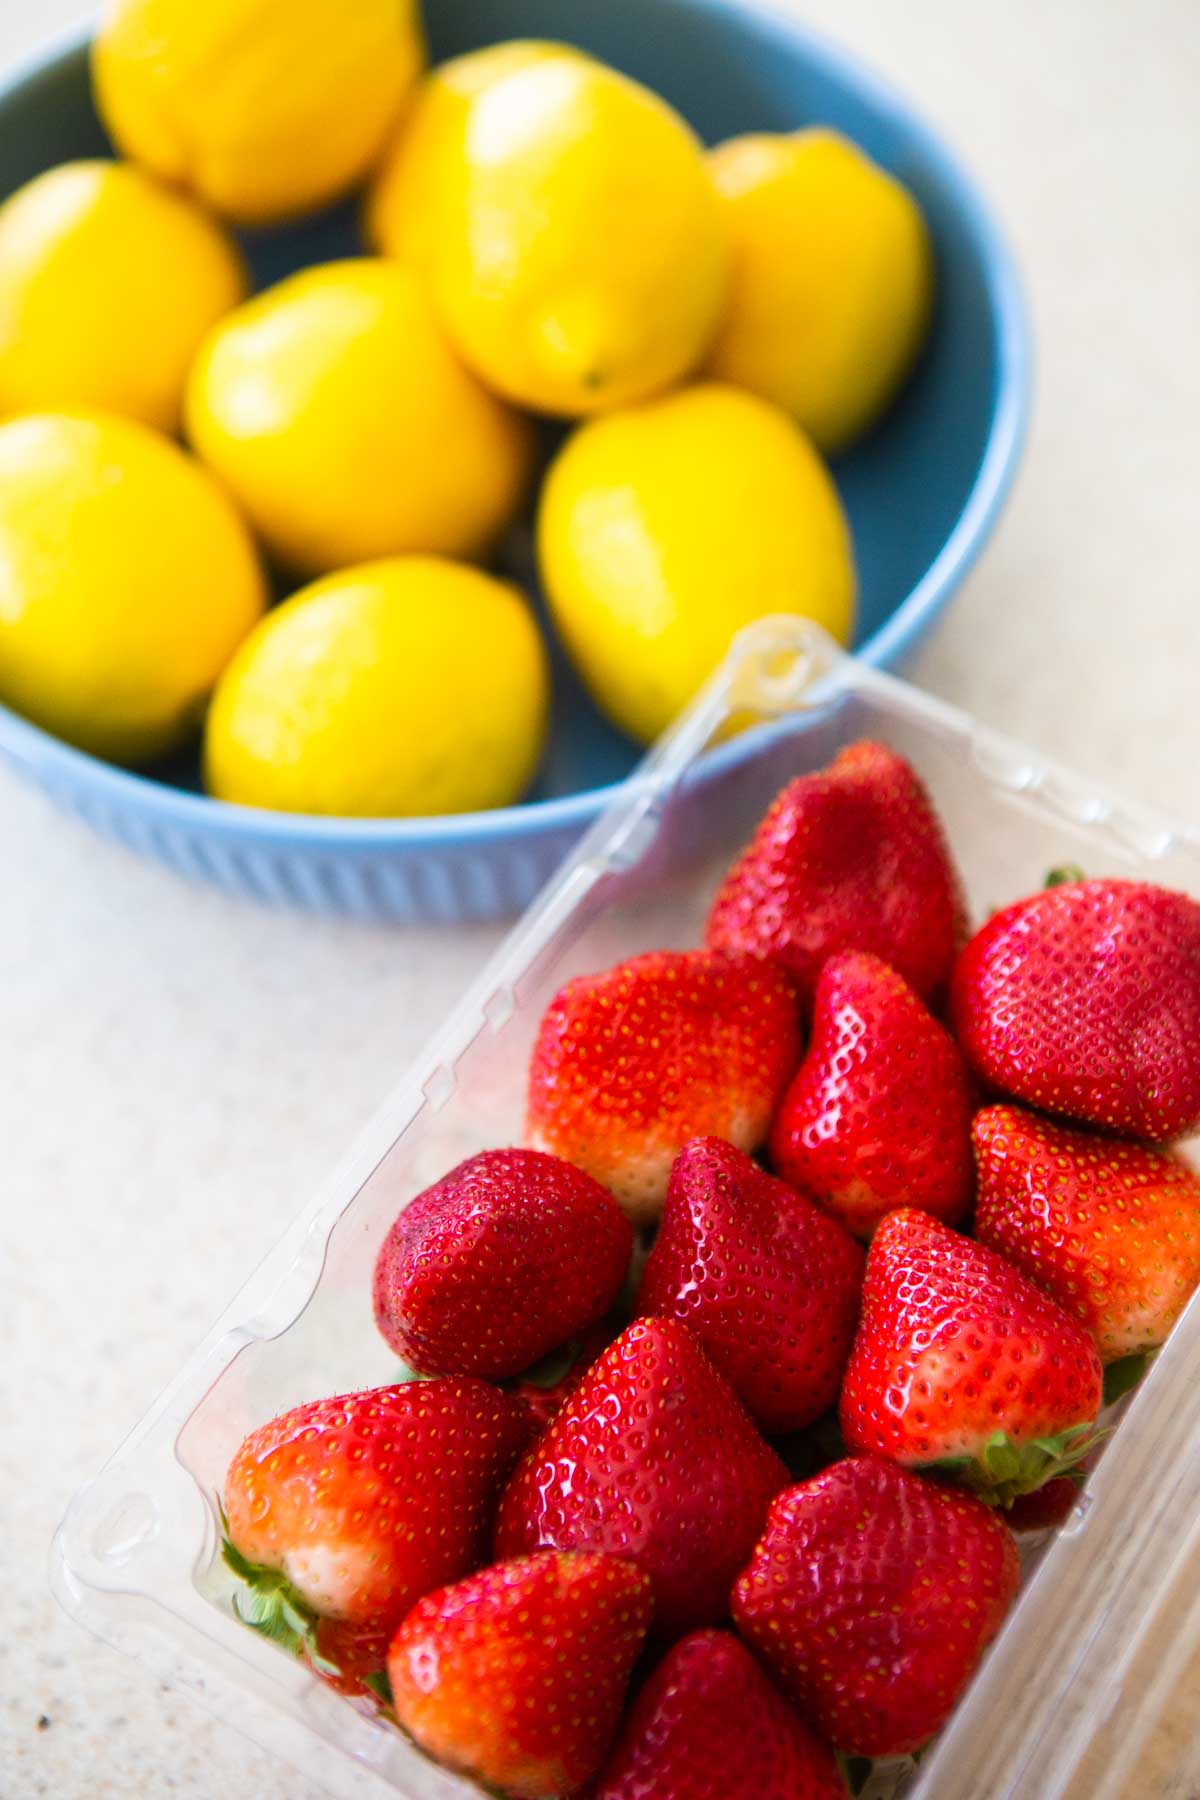 A bowl of lemons is next to a container of fresh strawberries.